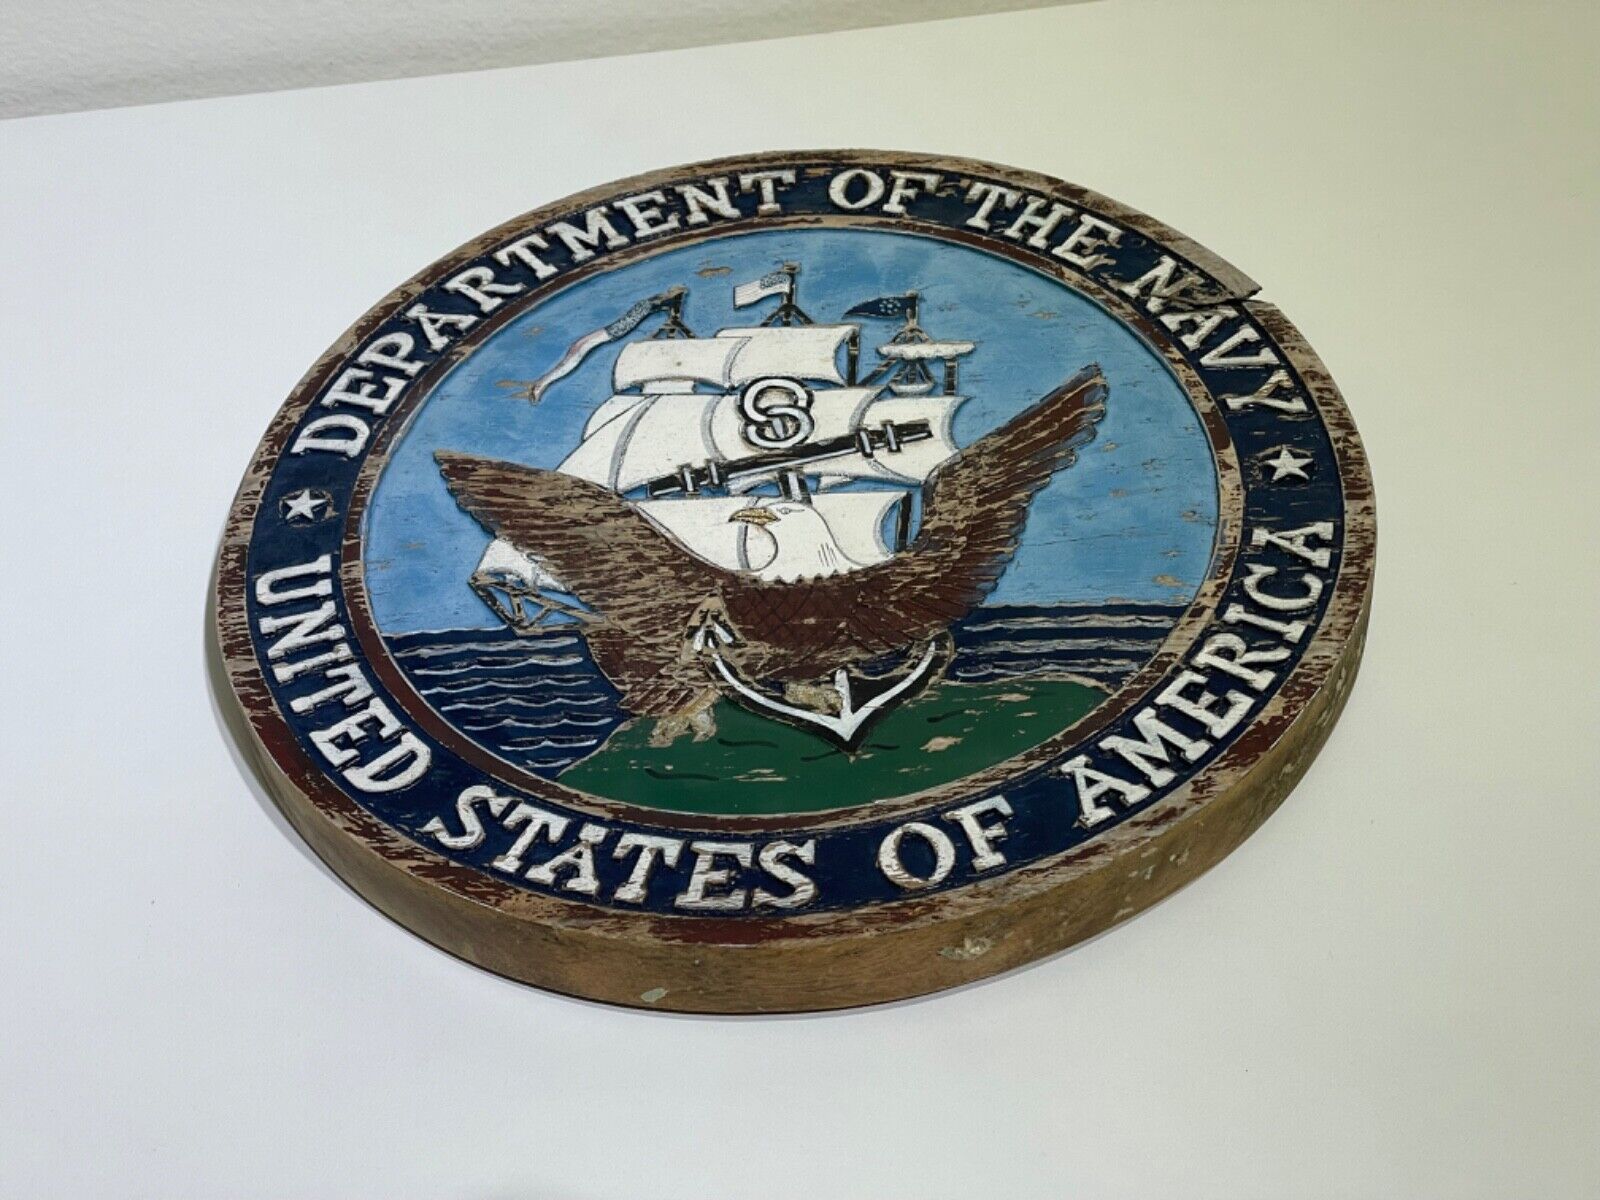 Department of the Navy | Vintage Round Solid Wood Sign | USA | 1940's,50's,60's?